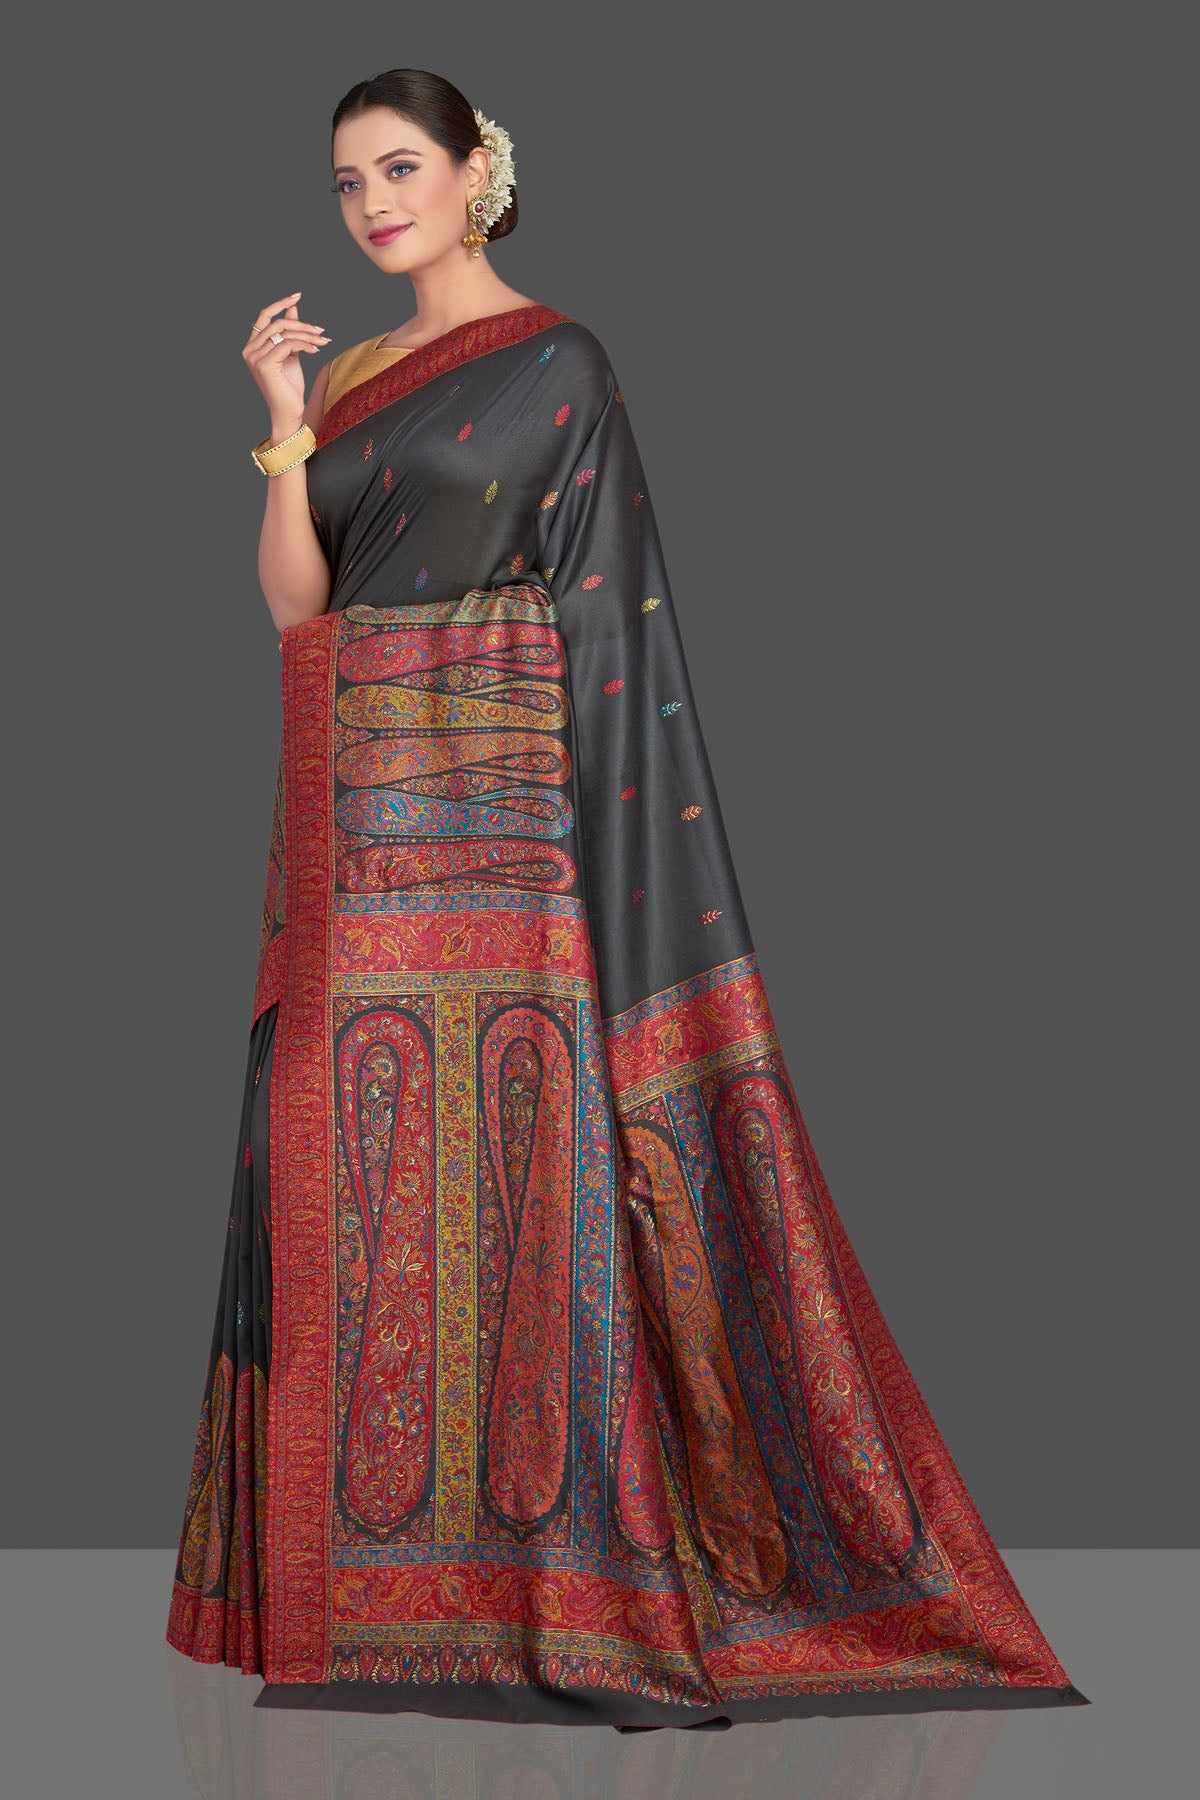 Shop stunning black tussar silk sari online in USA with multicolor Kani embroidery. Make your presence felt on special occasions in beautiful embroidered sarees, handwoven sarees, pure silk saris, tussar sarees from Pure Elegance Indian saree store in USA.-pallu